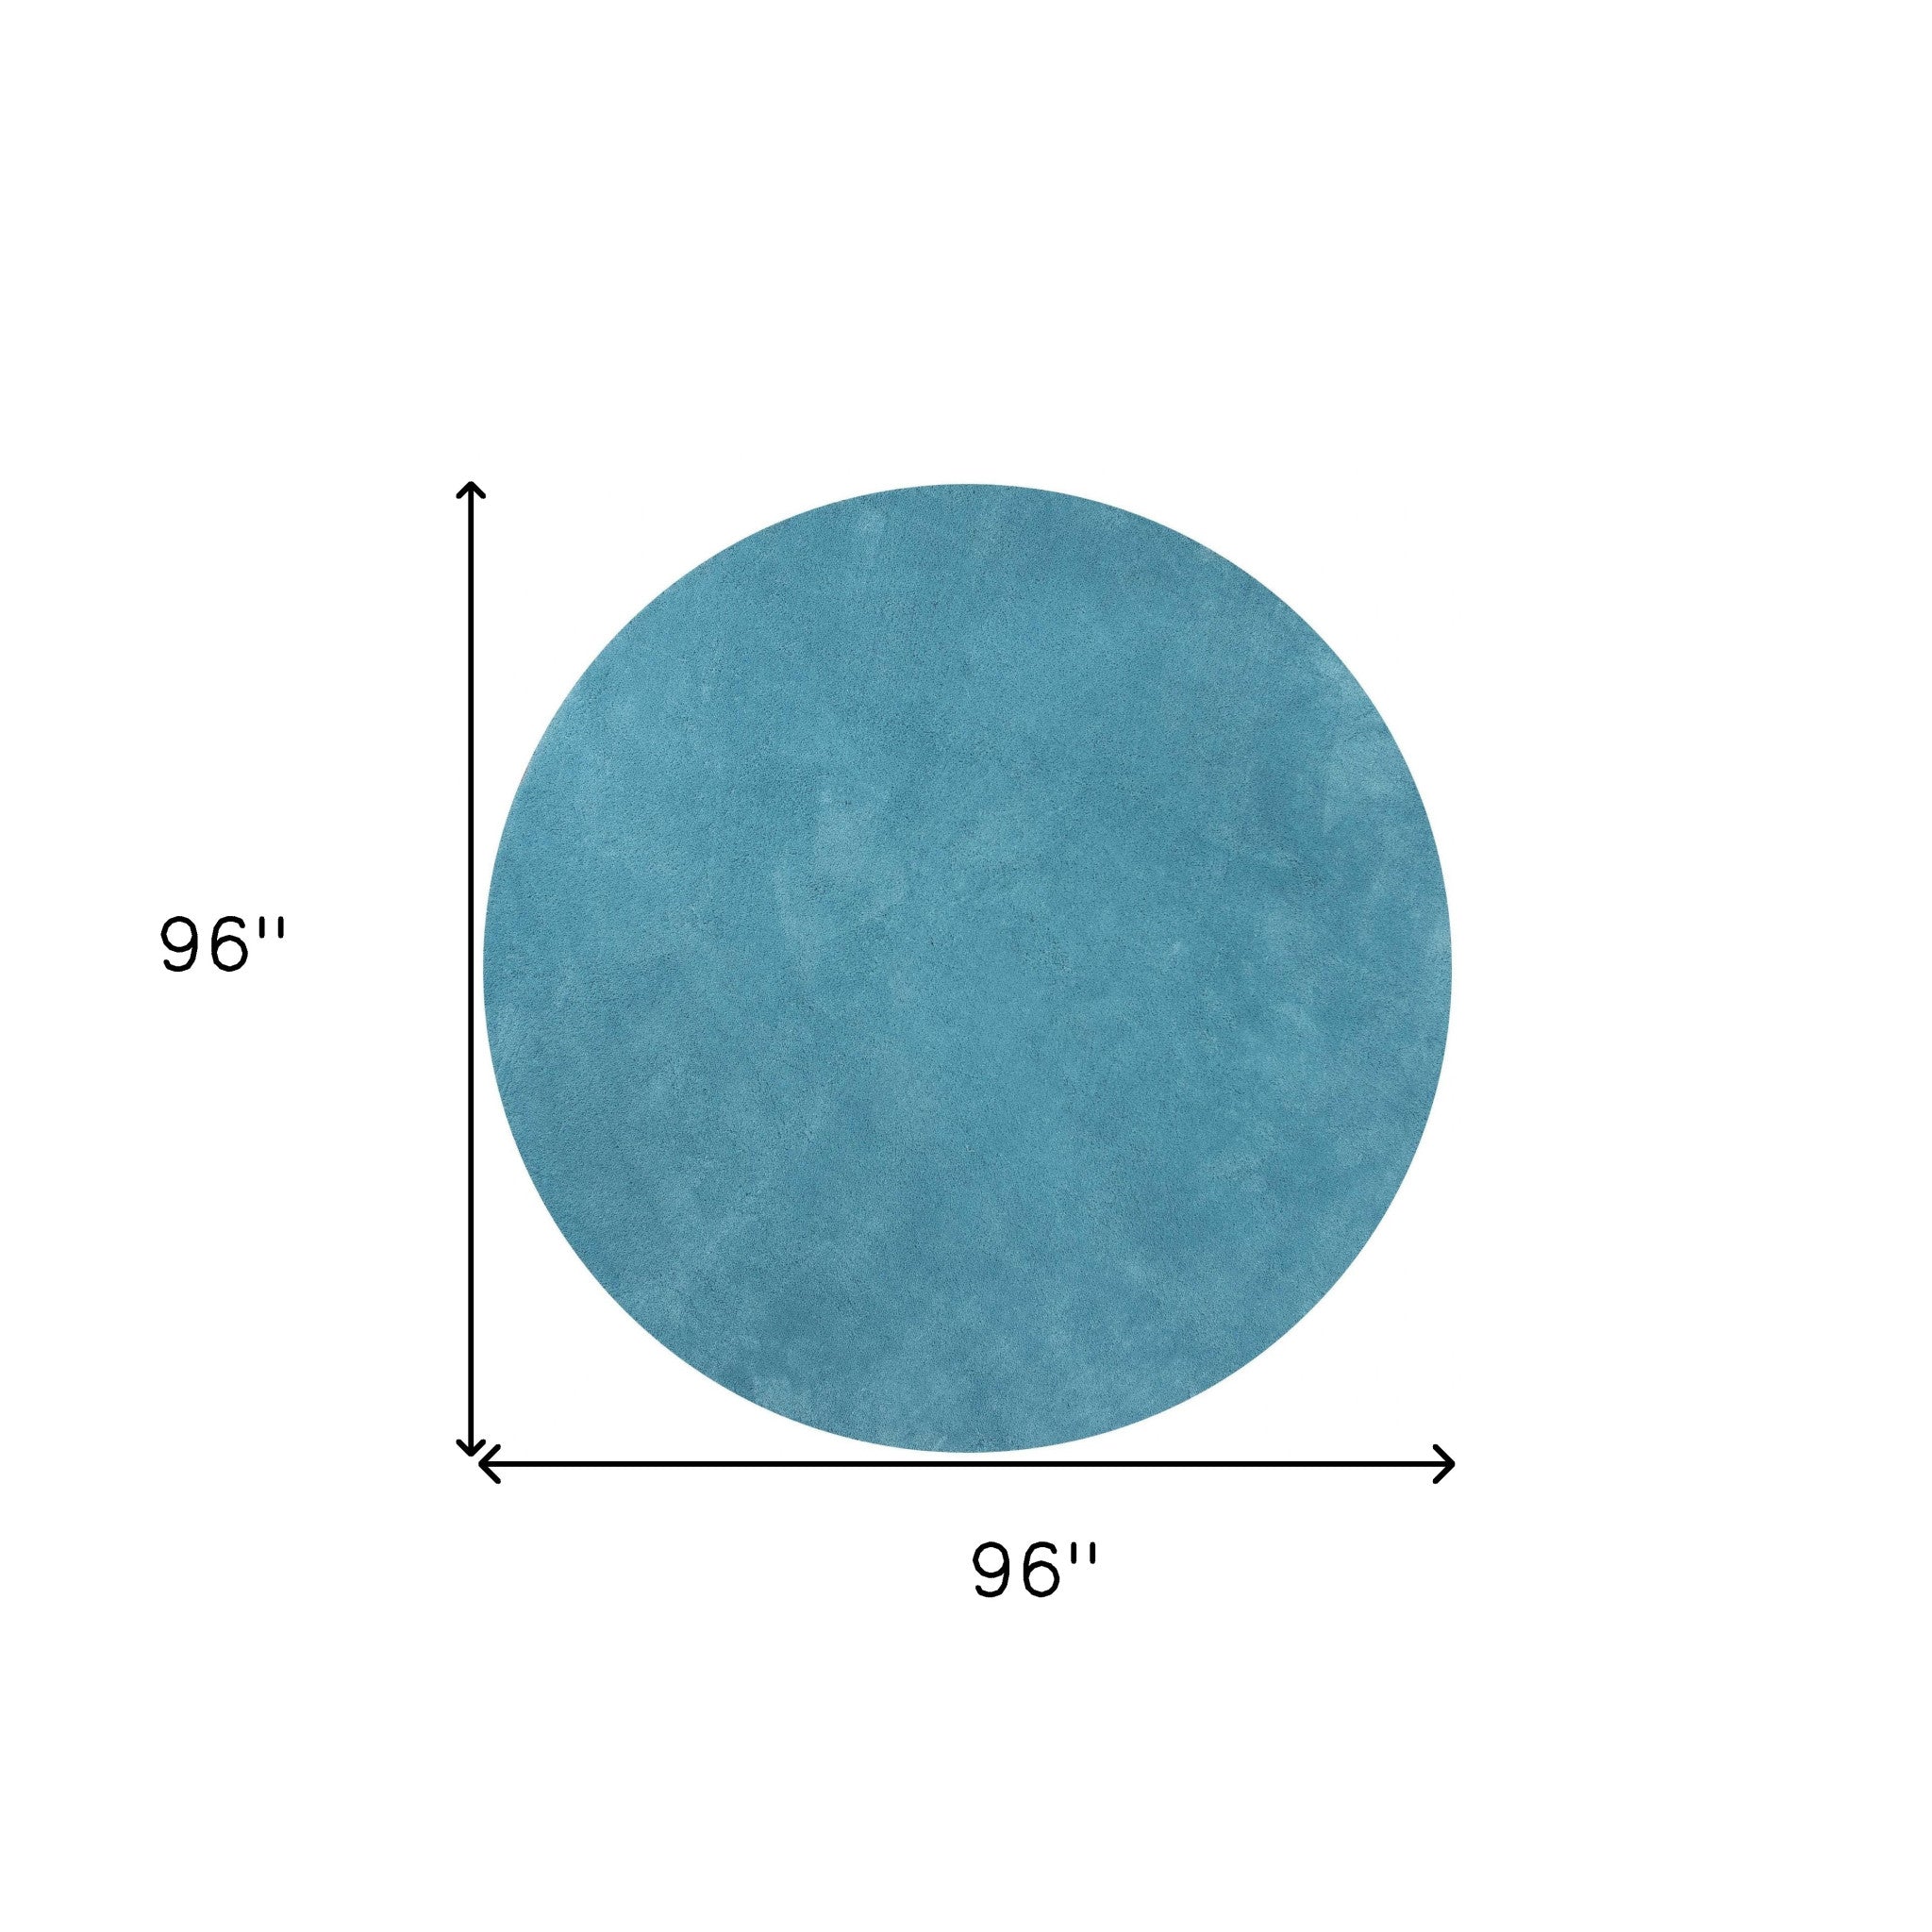 8' Round  Polyester Highlighter Blue Area Rug